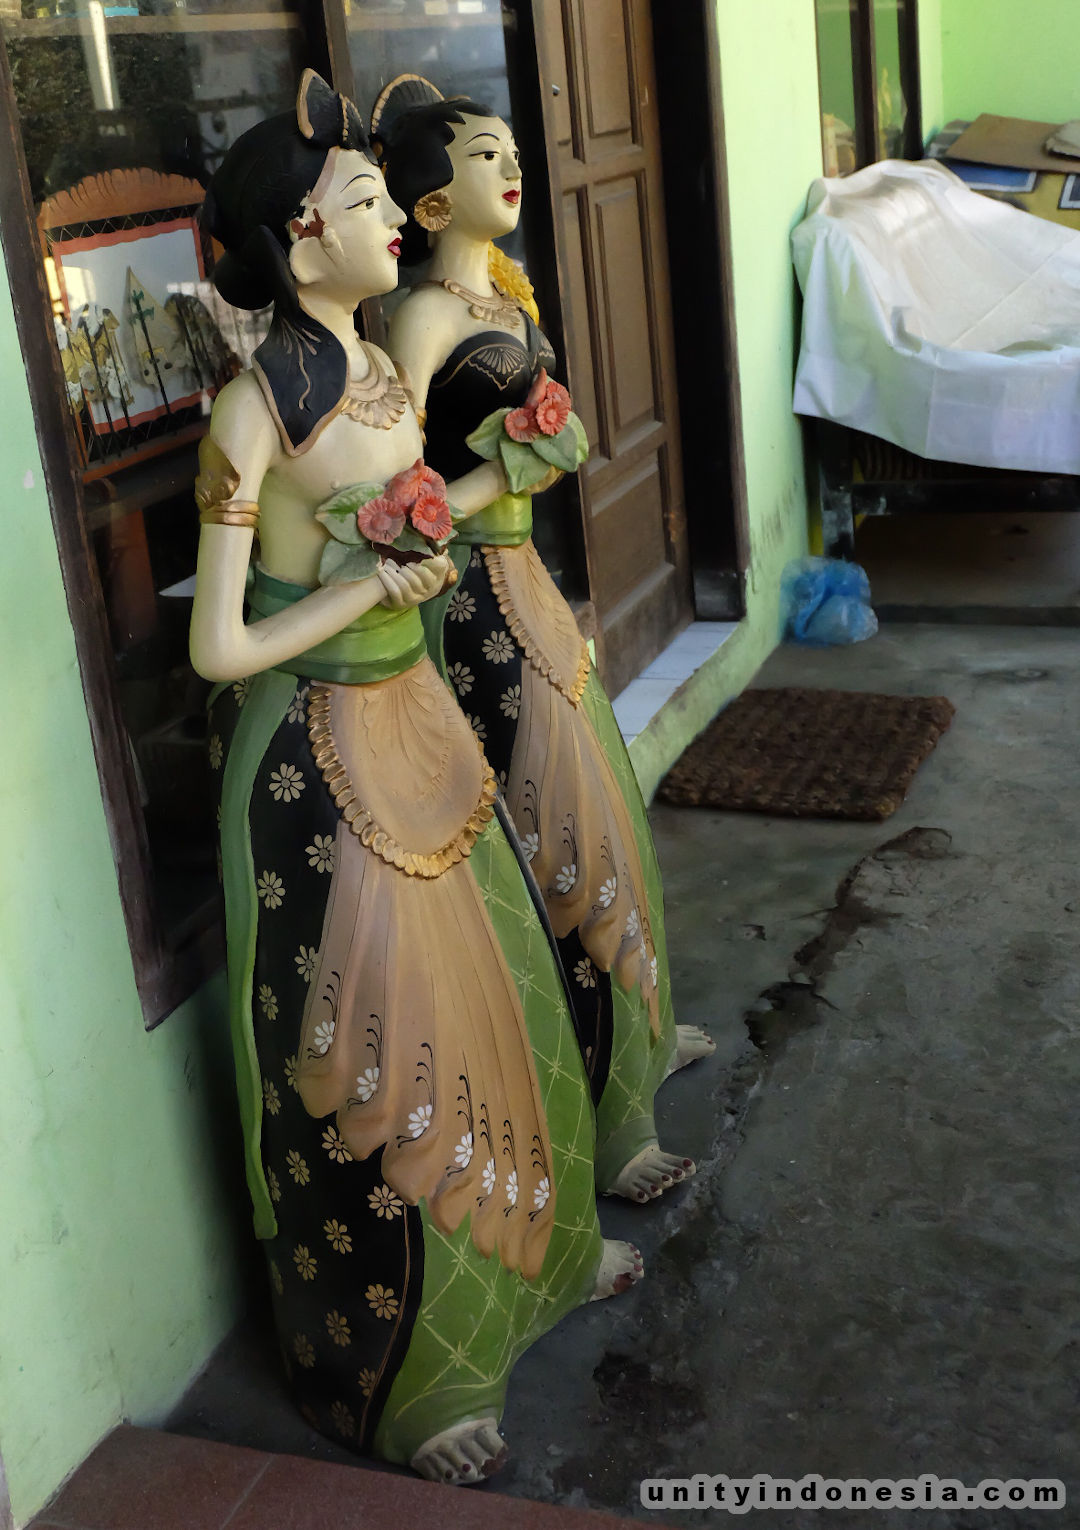 Indonesian pottery, statues of tall girls.